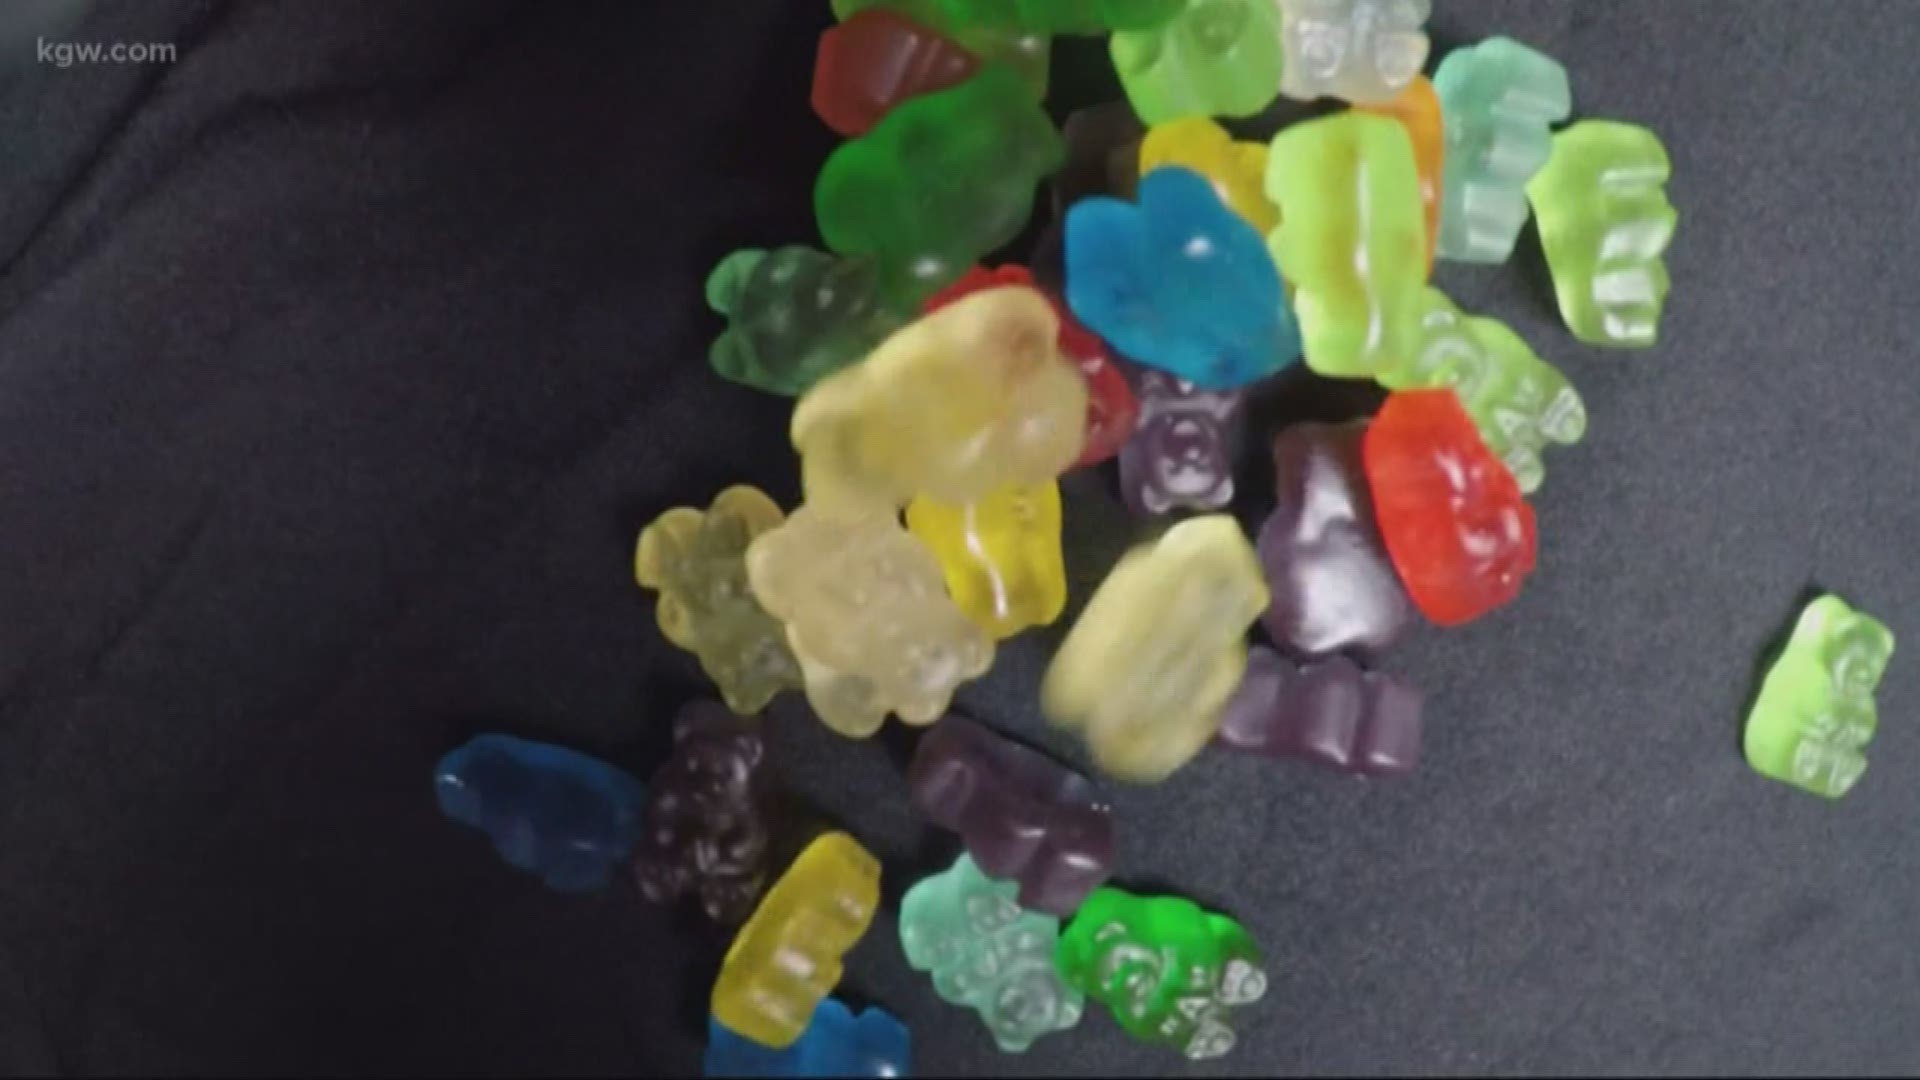 Two Washington probation officers save the life of a woman with gummy bears